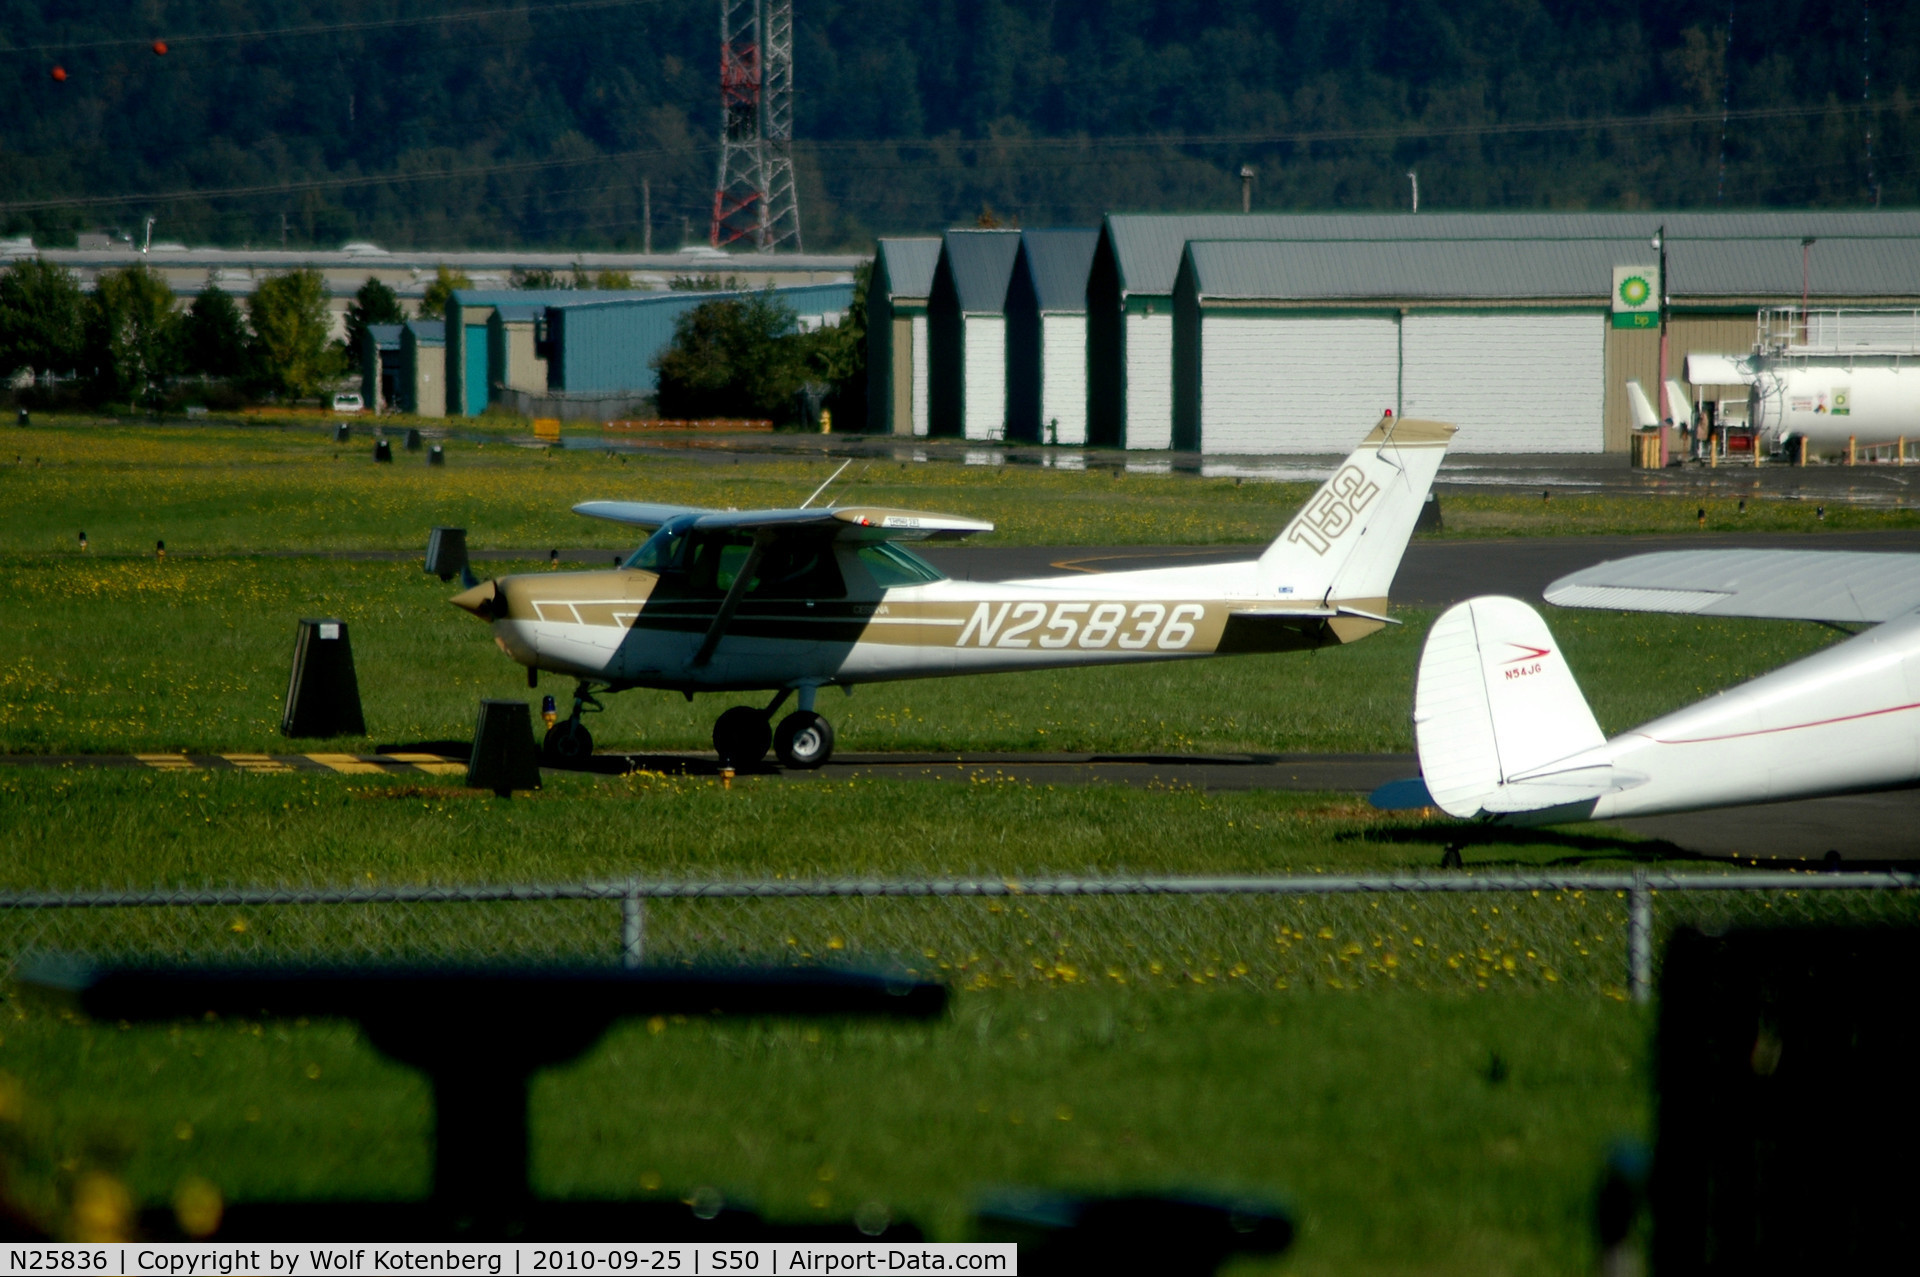 N25836, 1977 Cessna 152 C/N 15280808, rolling toward the active